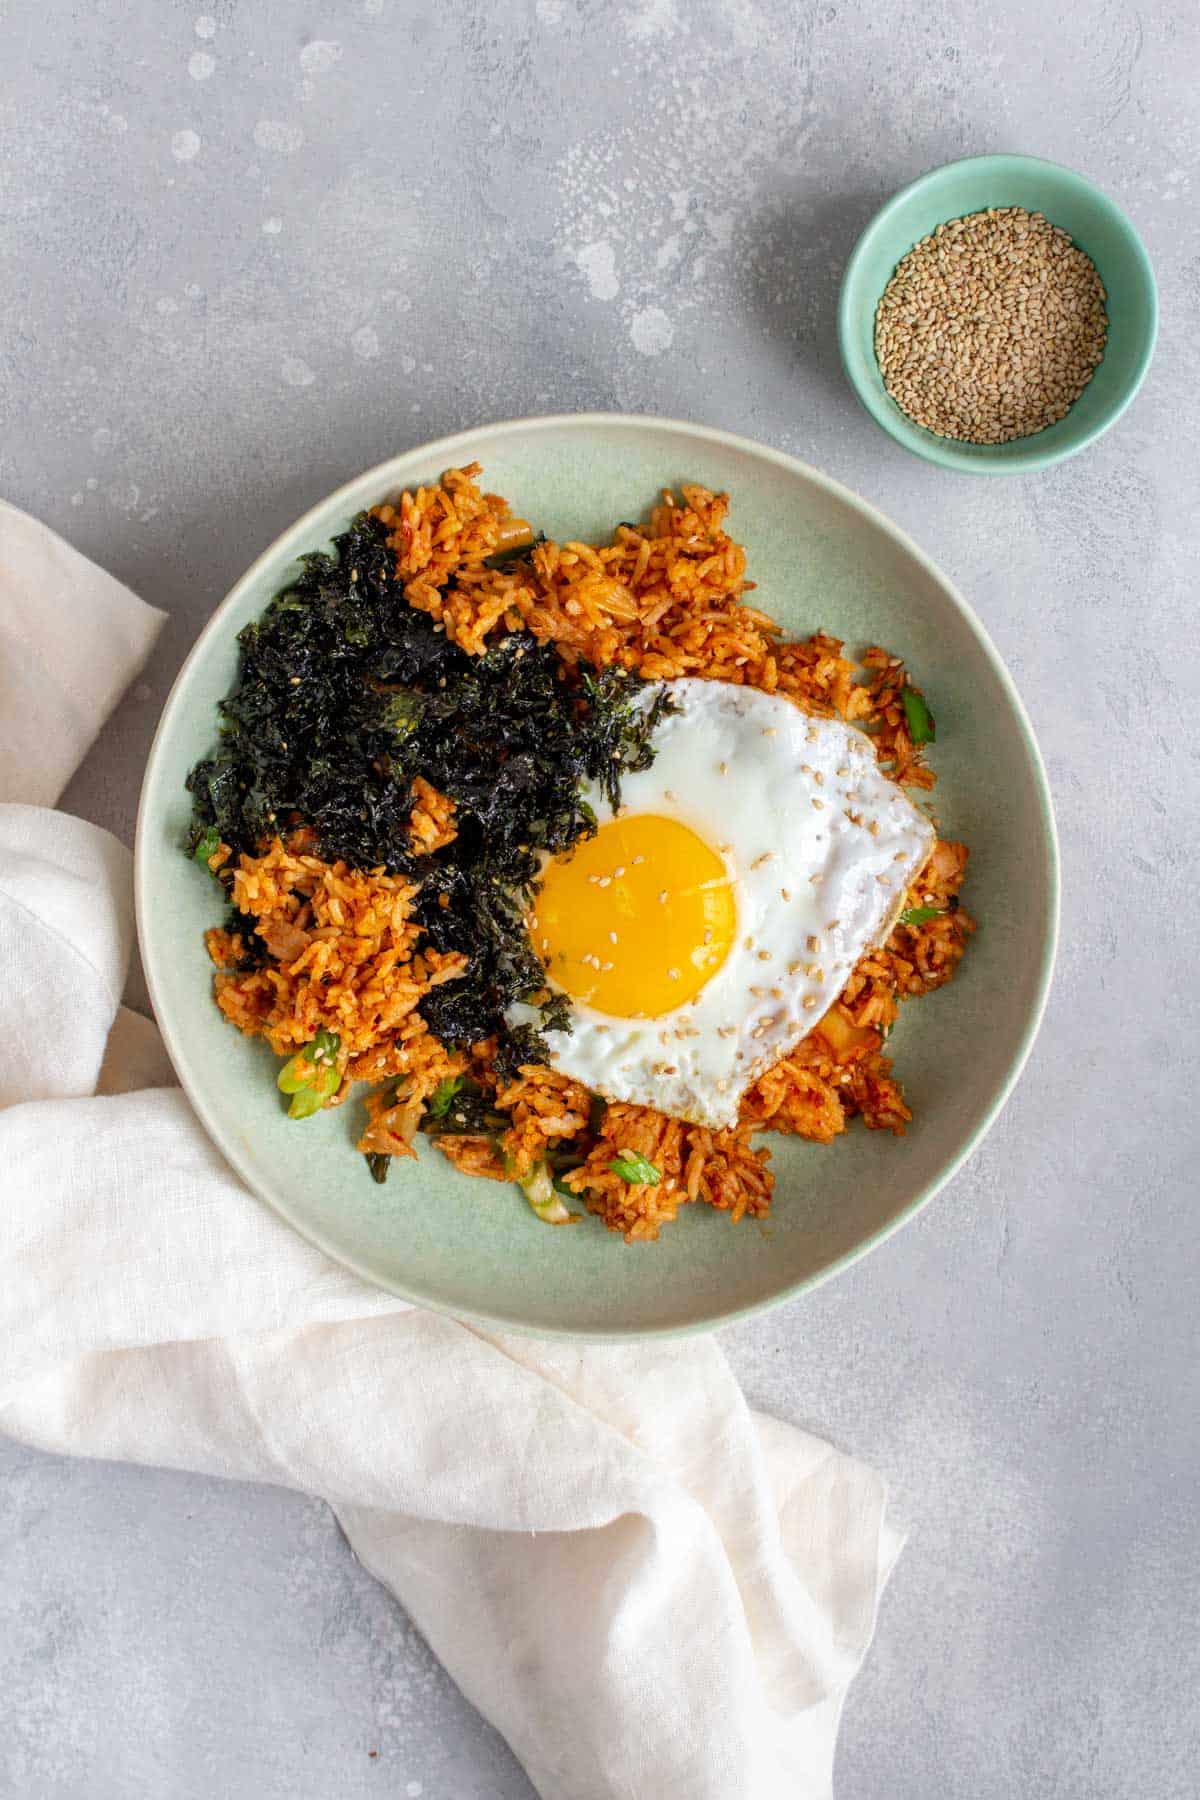 A bowl of tuna kimchi fried rice with a fried egg and shredded seaweed.